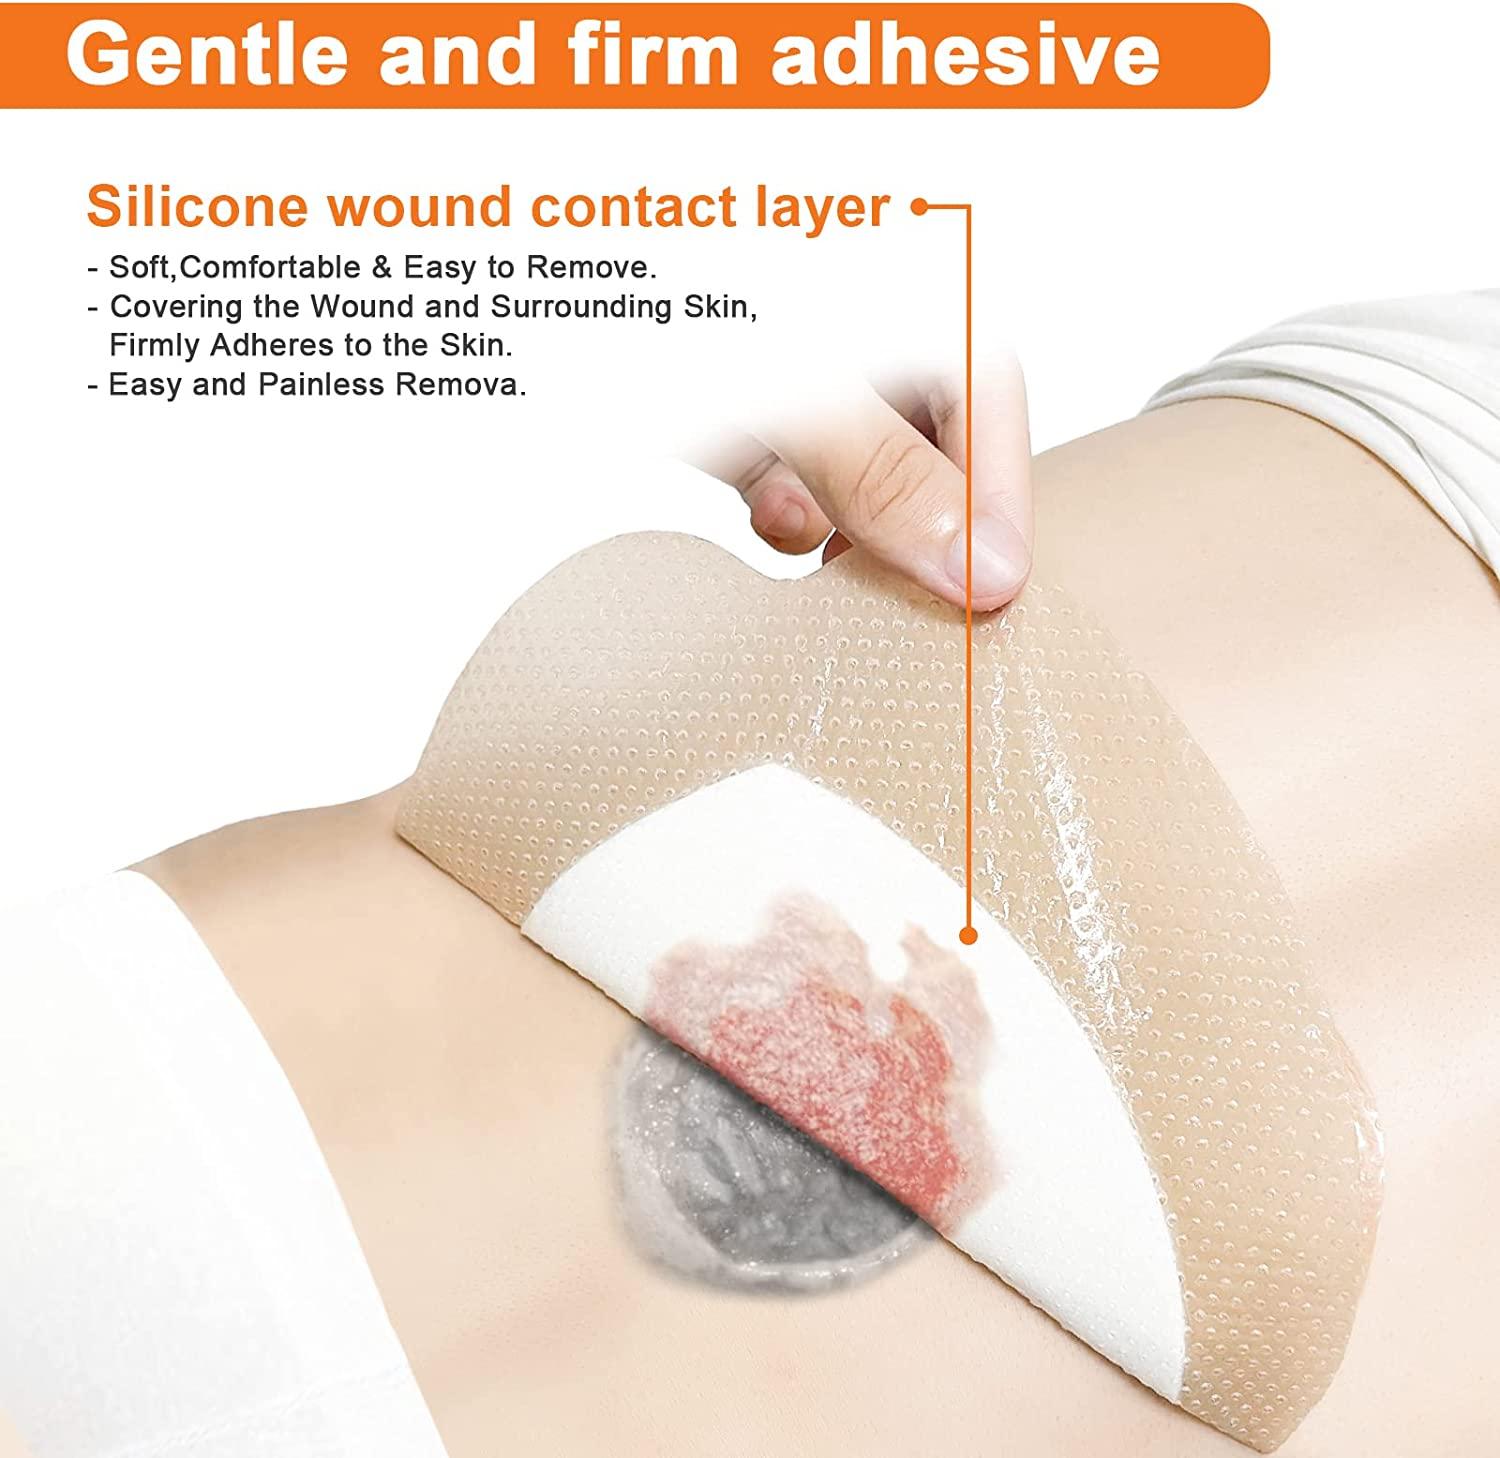 Sacrum Silicone Foam Dressing with Border for Sacral Ulcer, Butt